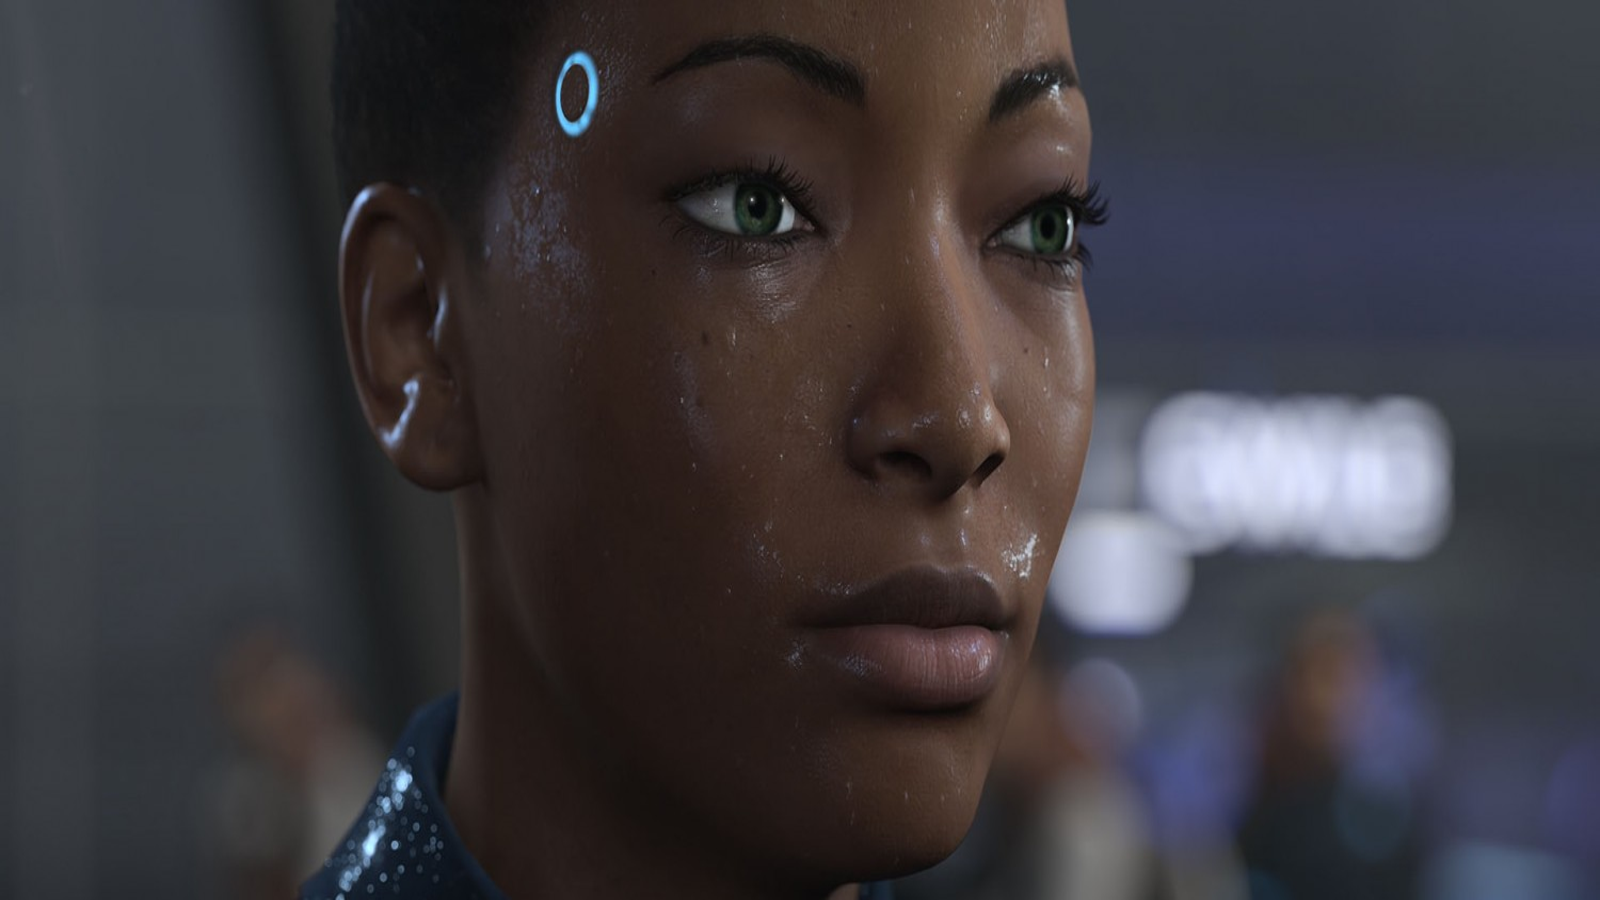 Detroit: Become Human Review - IGN